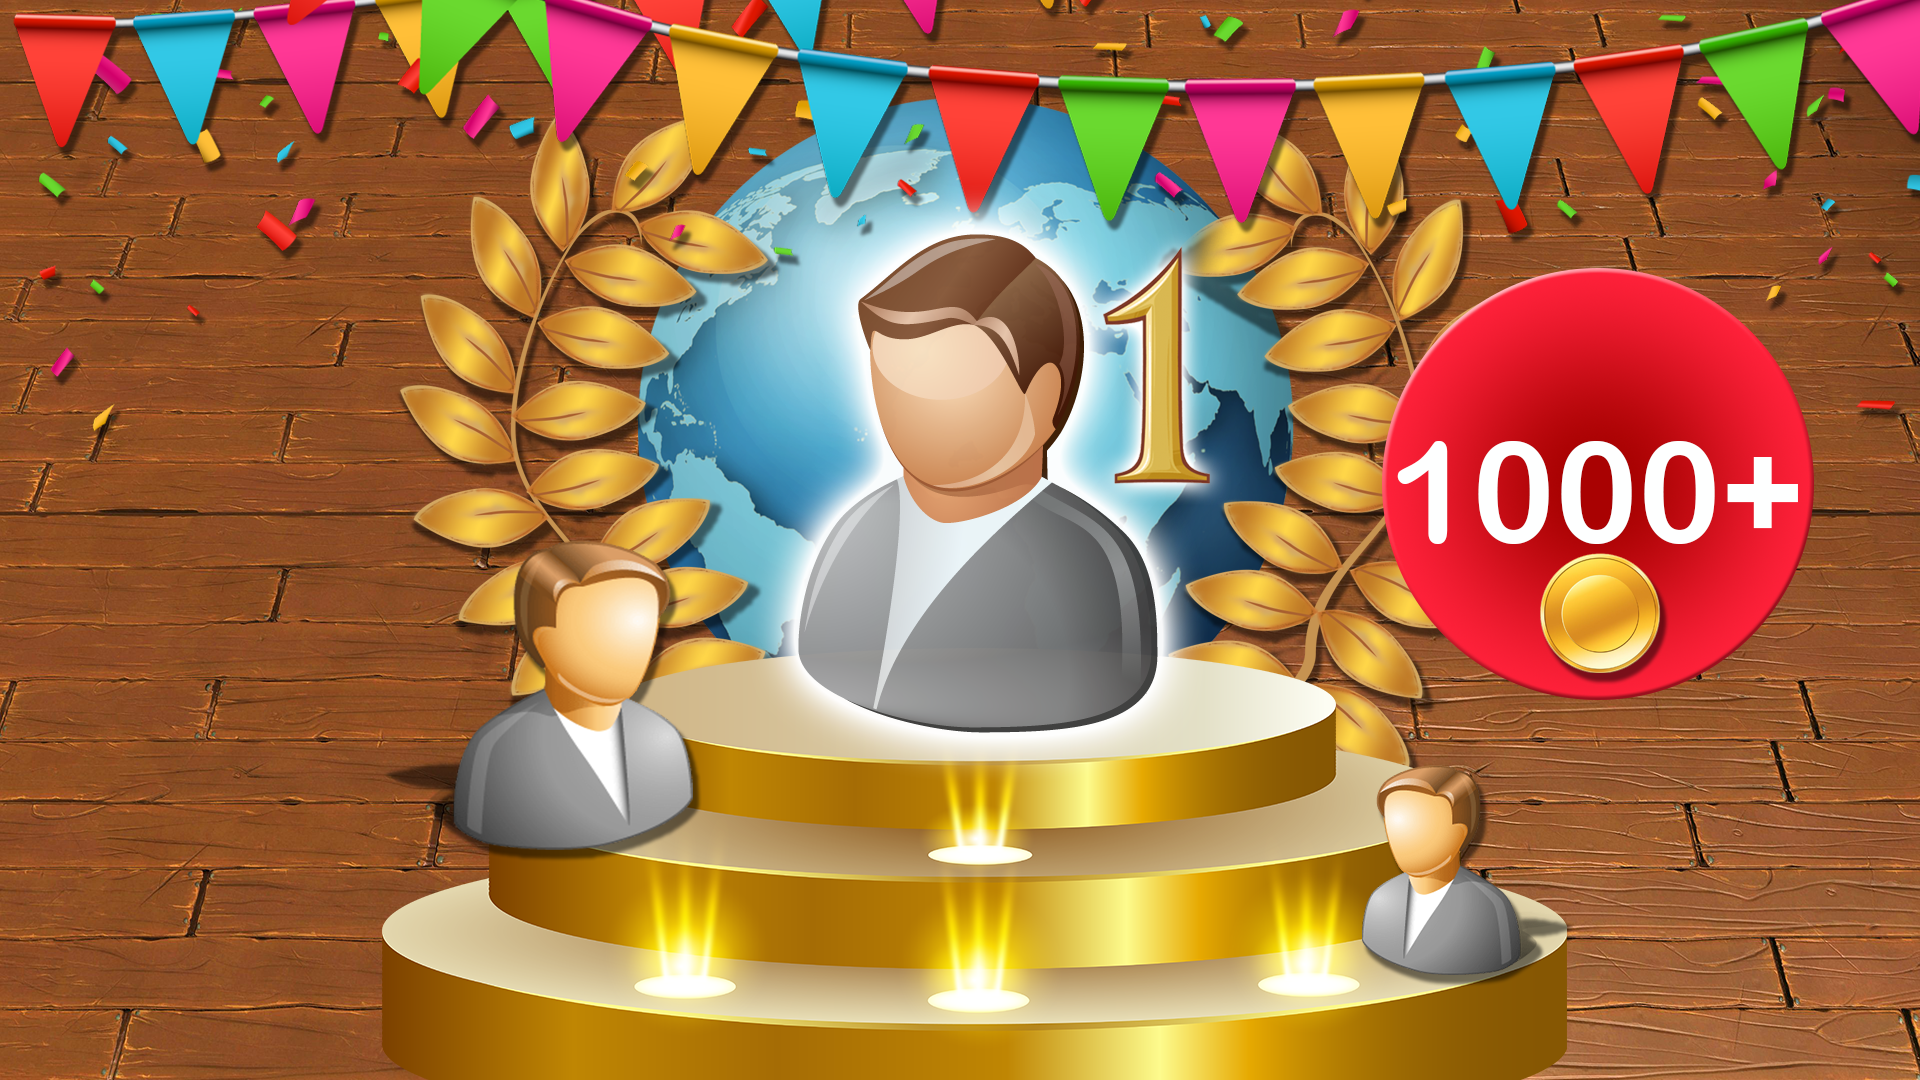 Icon for Win online game ending with over 1000 points